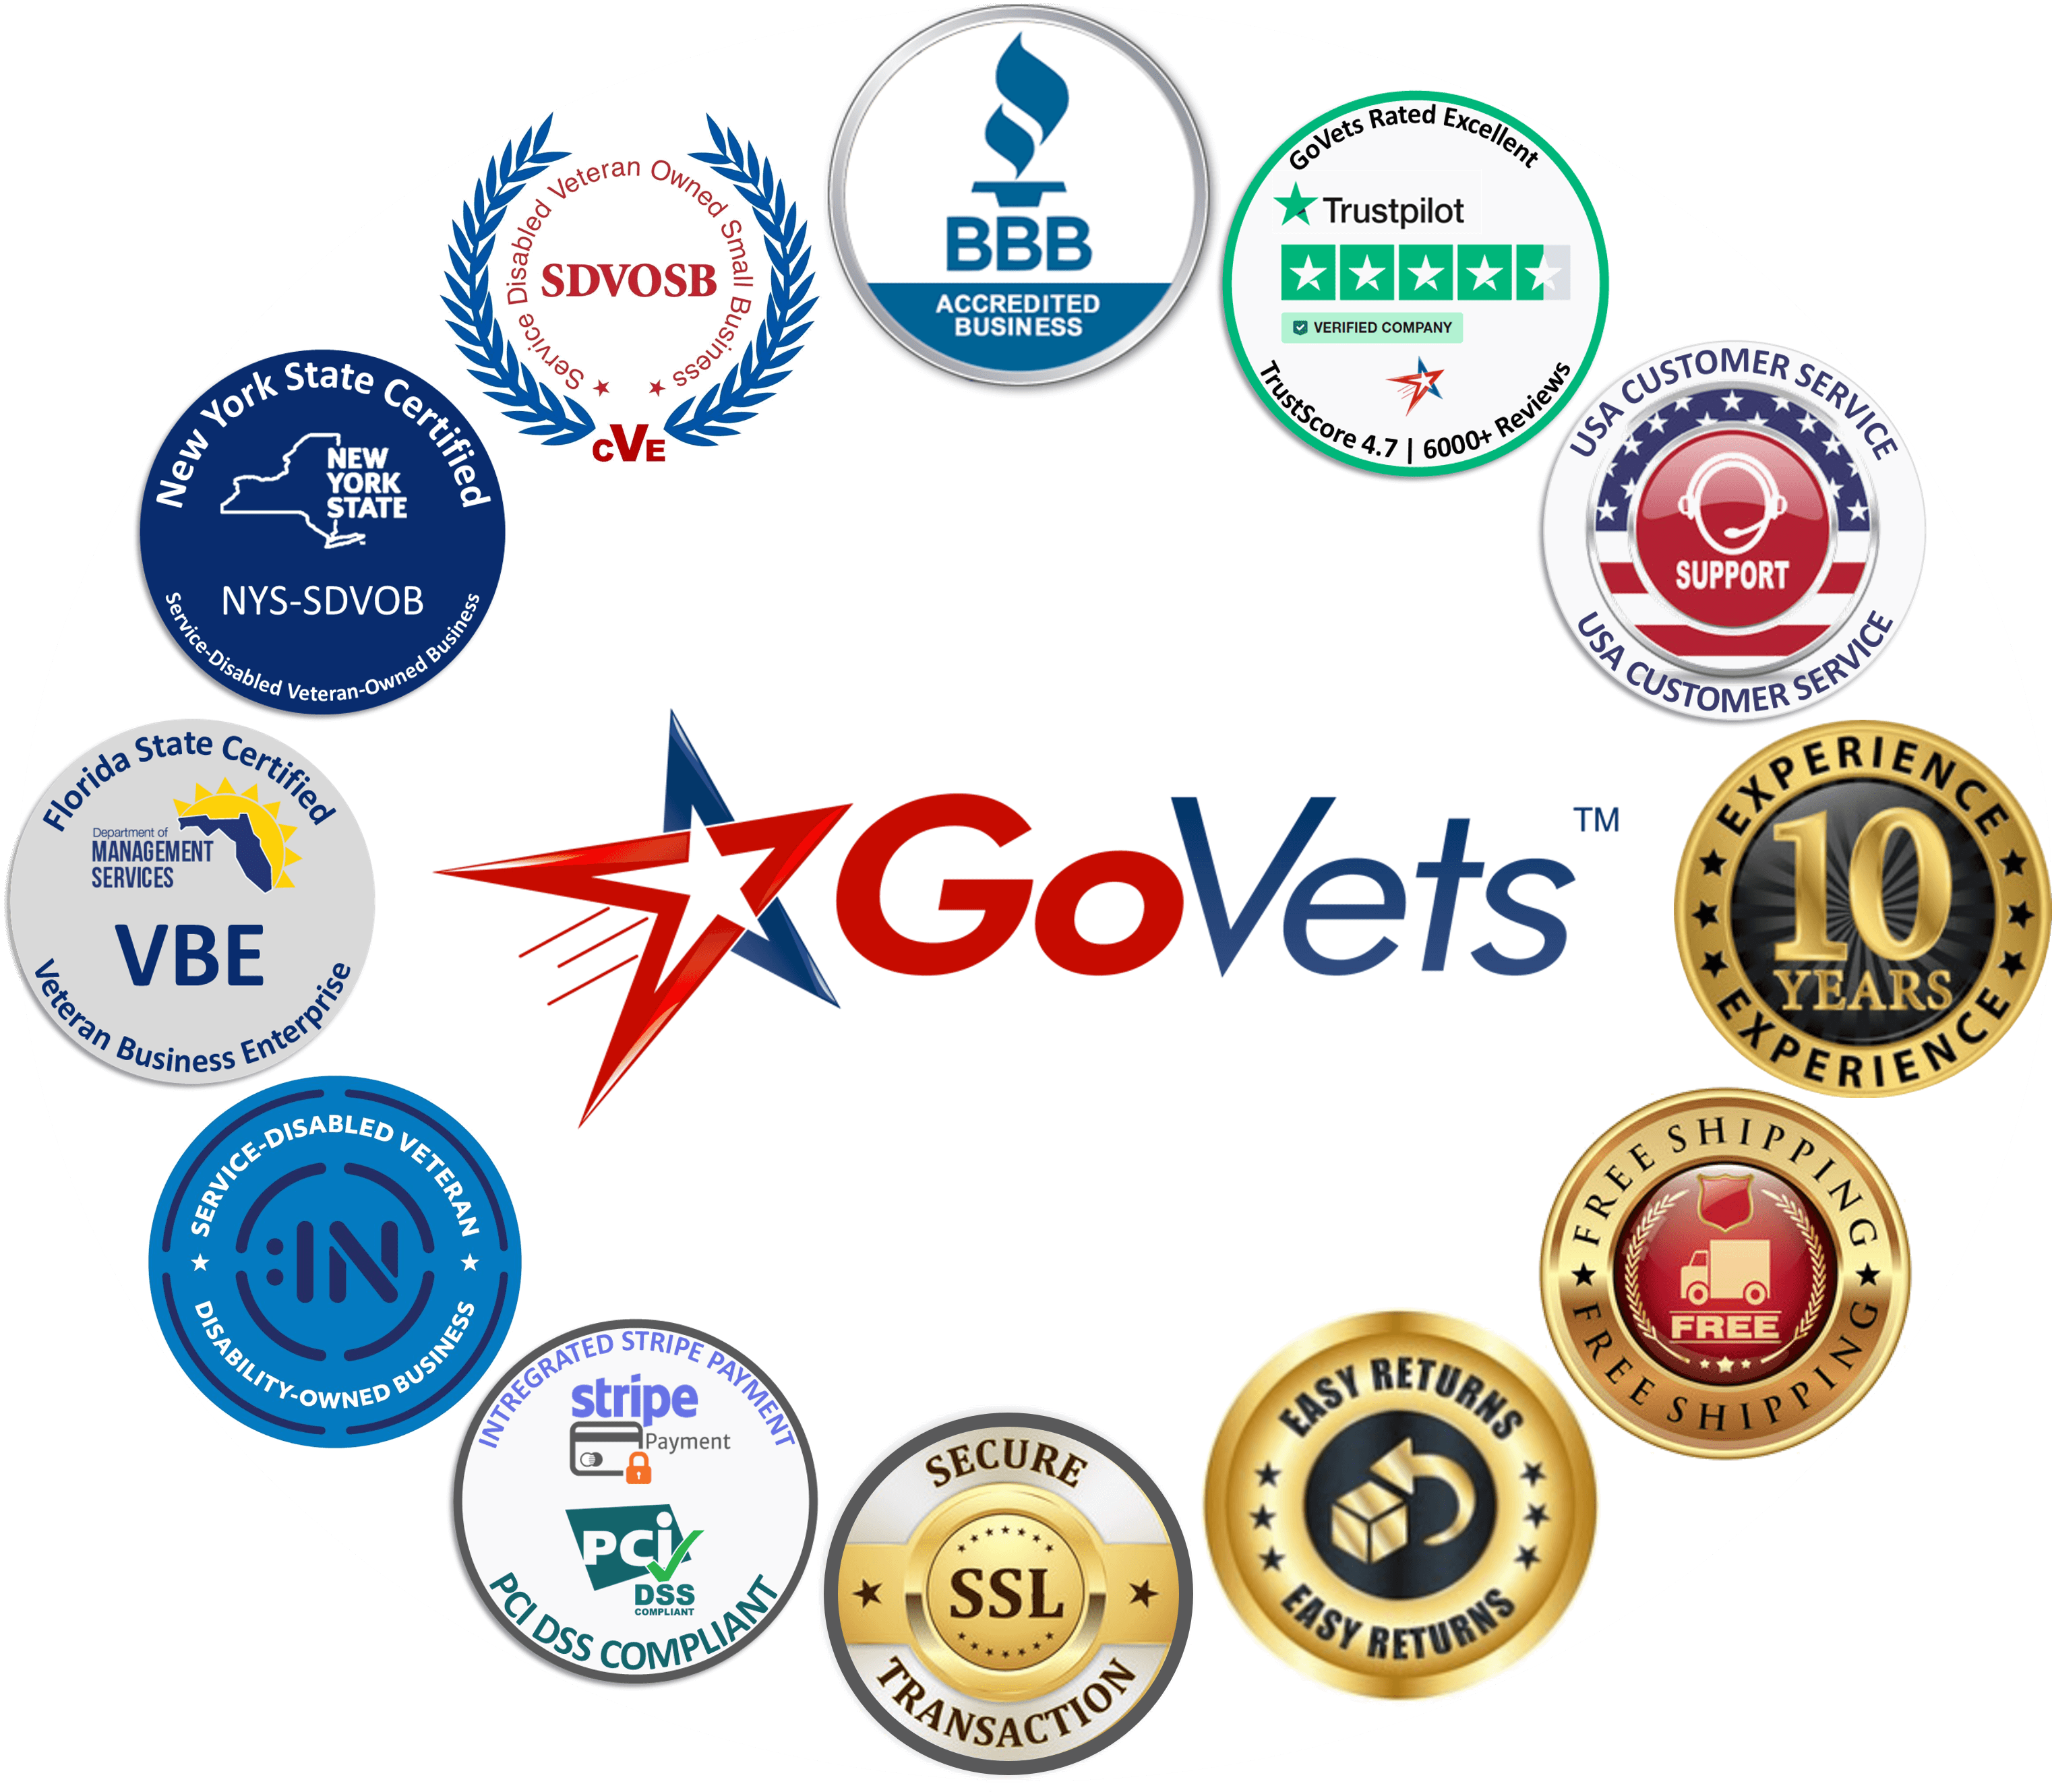 Earning Your Trust through Accreditation, Reviews, Endorsements and Certifications